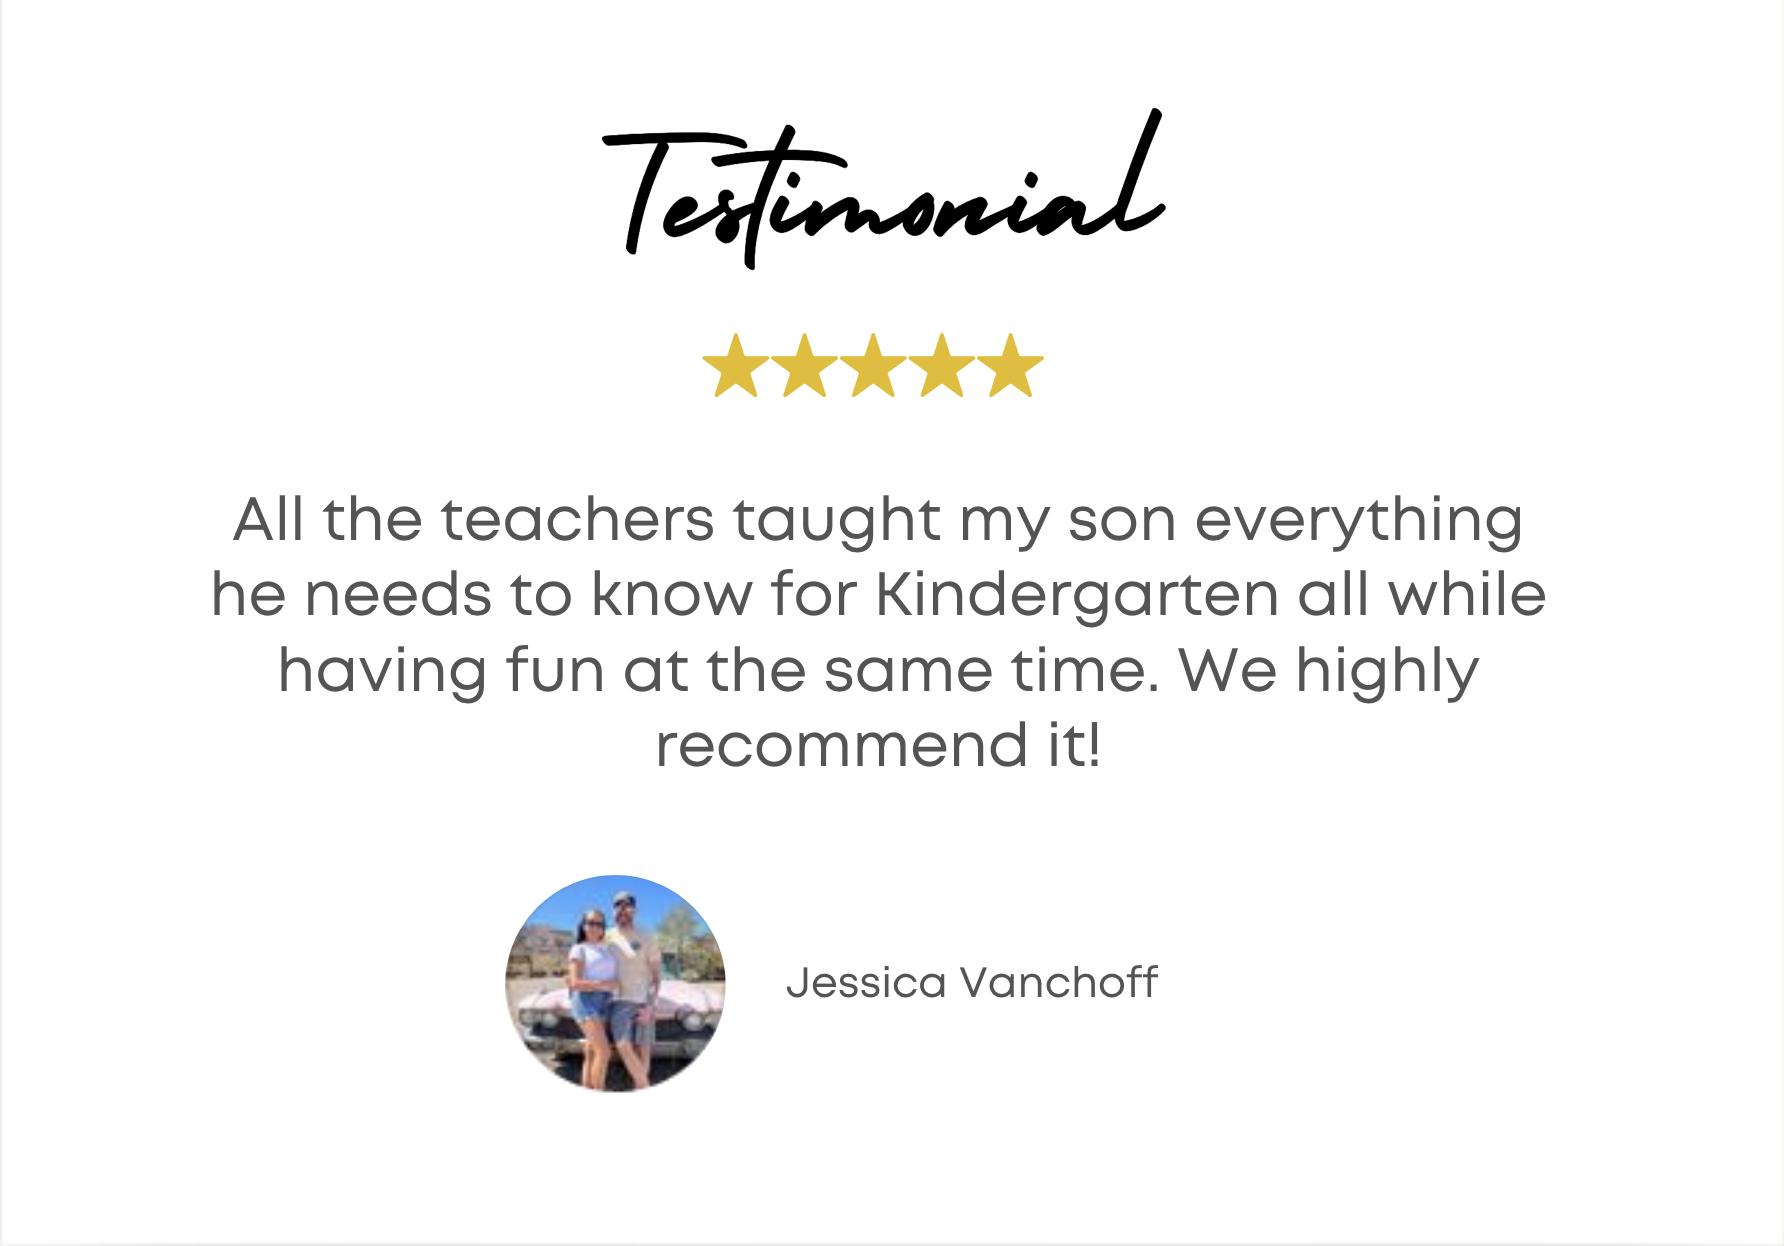 Testimonial - All the teachers taught my son everything he needs to know for Kindergarten ll while having fun at the same time. We highly recommend it! - Jessica Vancoff